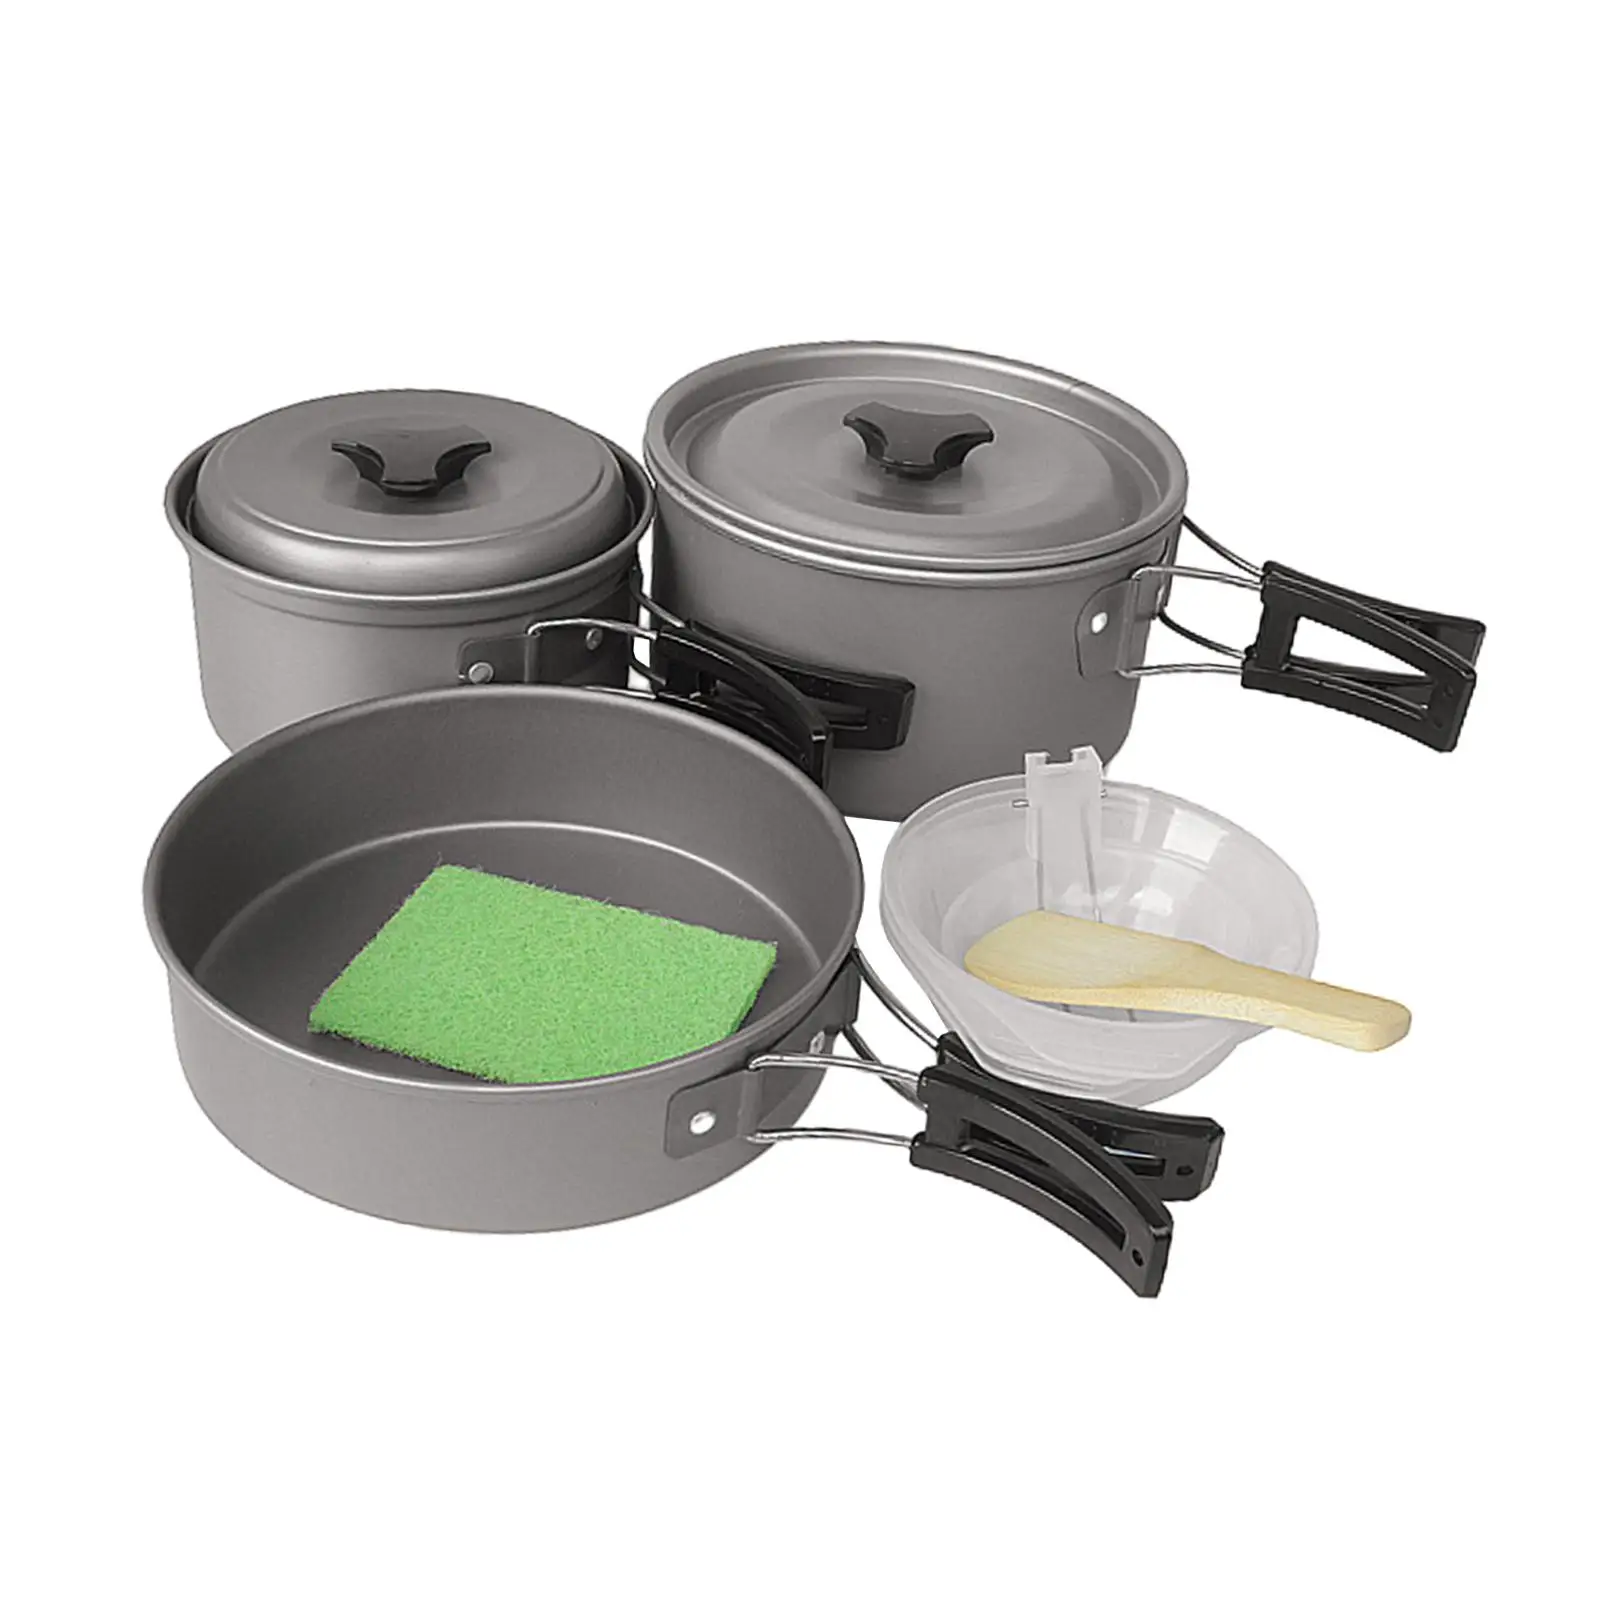 Camping Cookware Mess Set Cooking Pot Aluminum Alloy Portable Frying Pan Camping Cooking Set for Camp Outdoor Equipment Gear